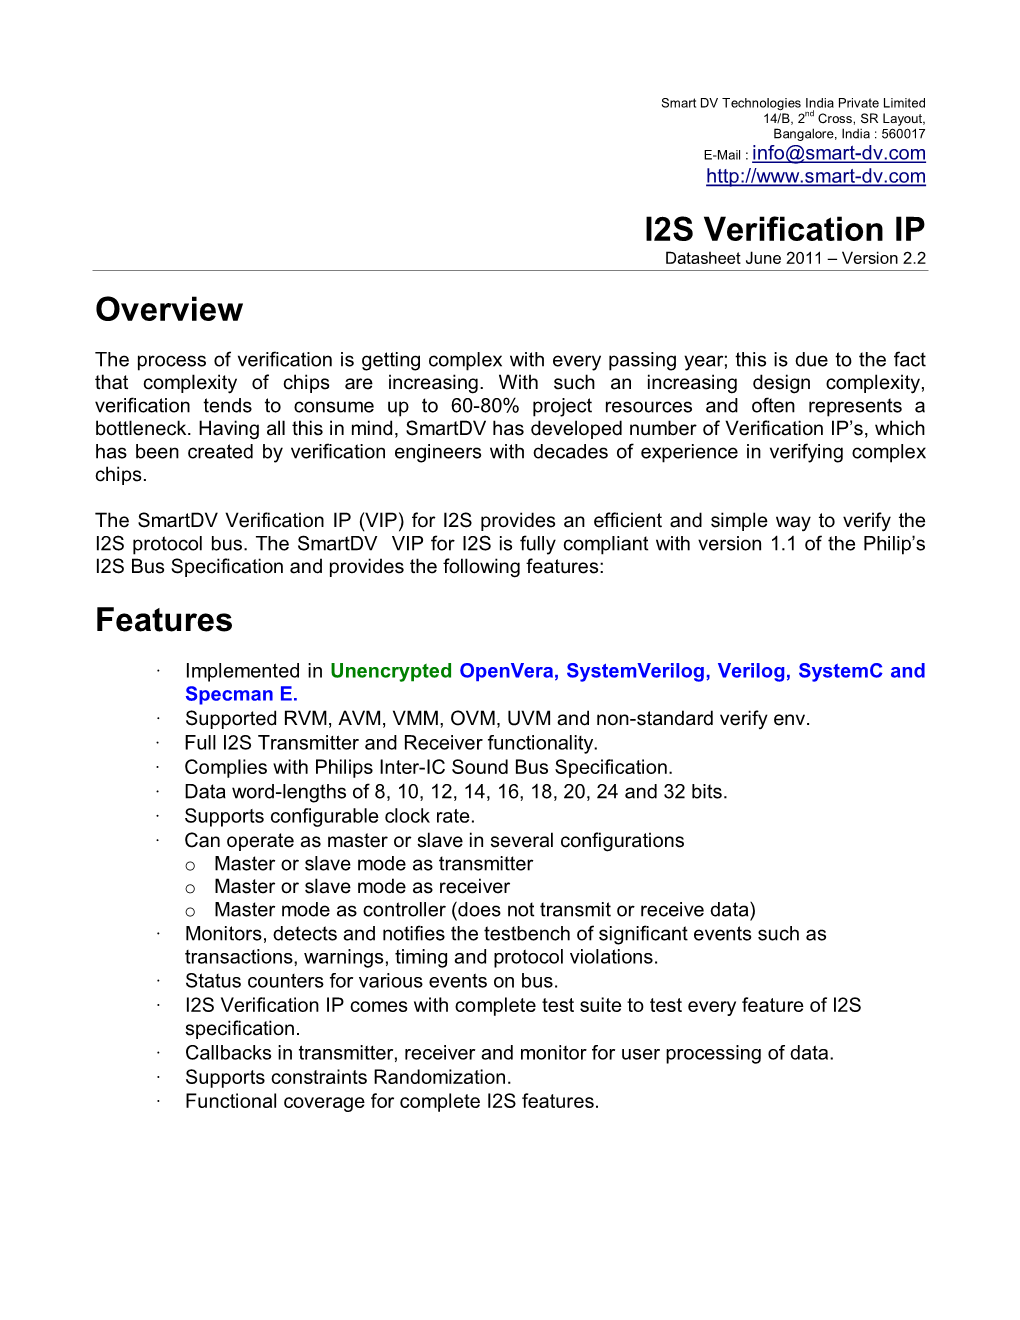 I2S Verification IP Overview Features